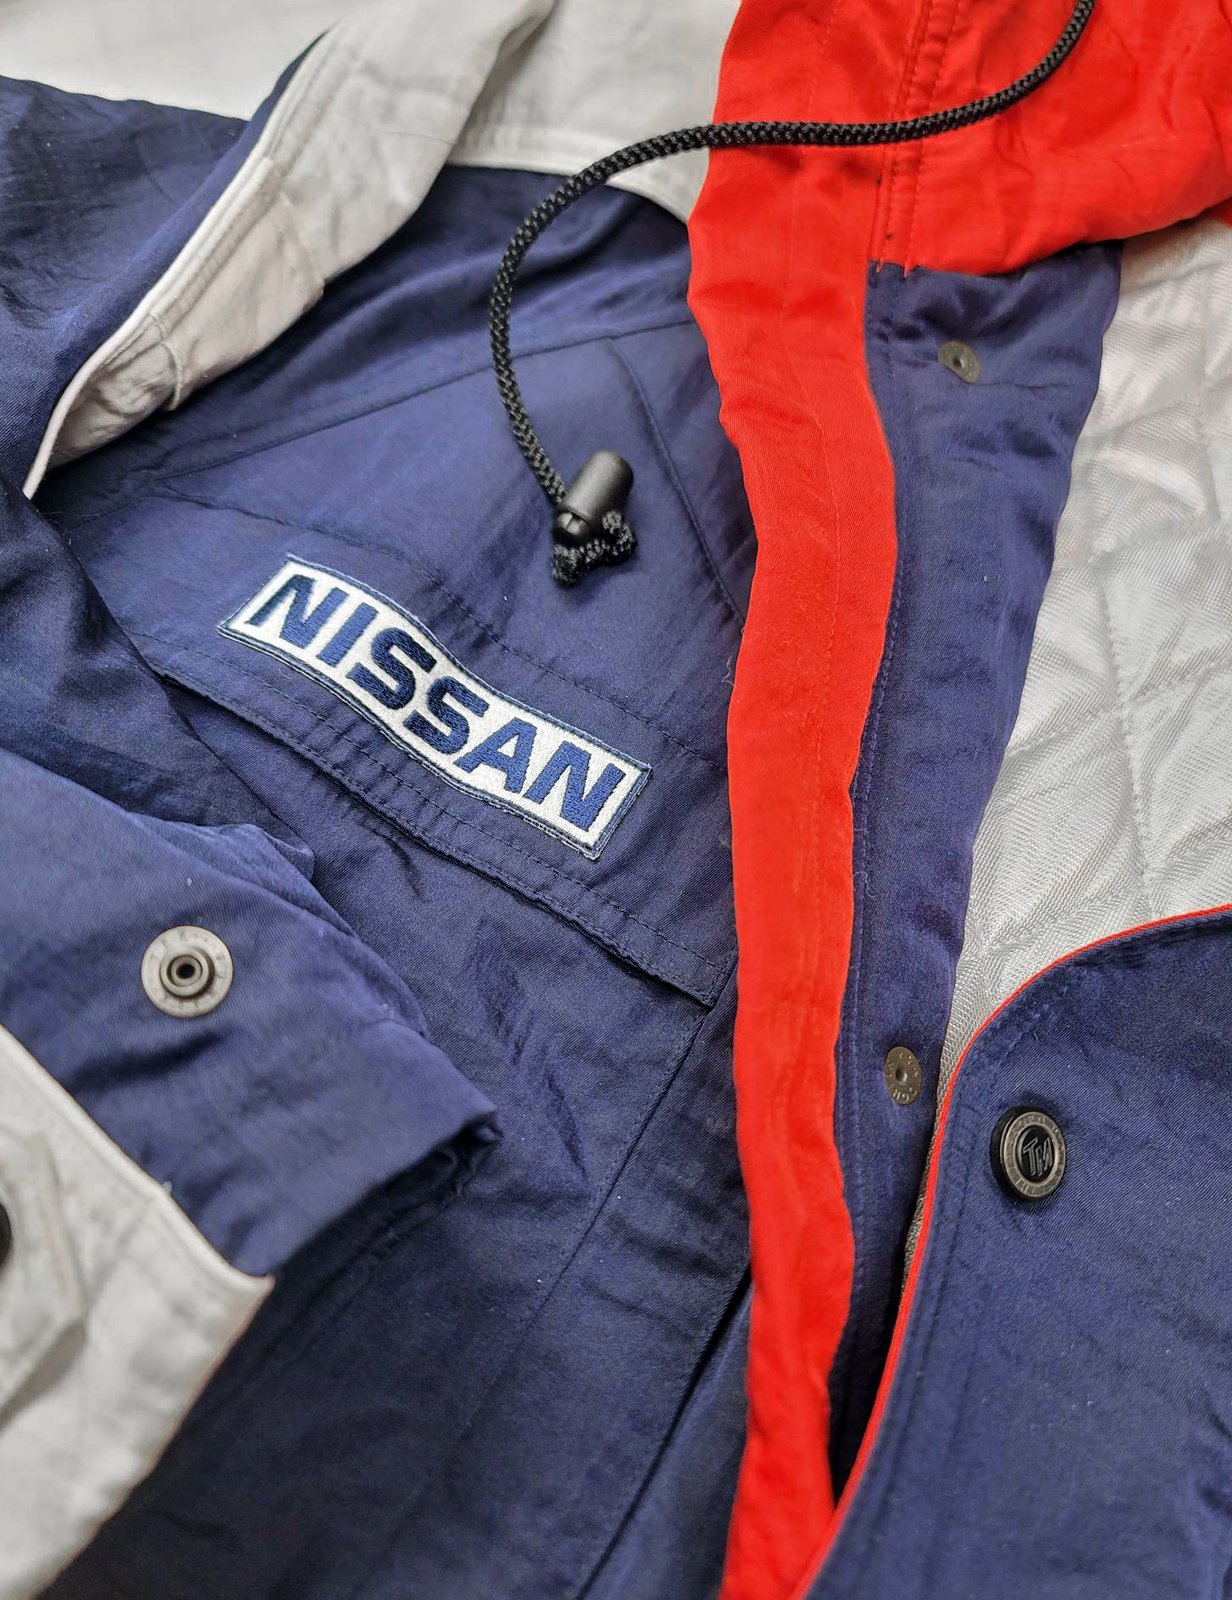 Rare Vintage Nissan GT-R Long Jacket | After Hours Supply Co